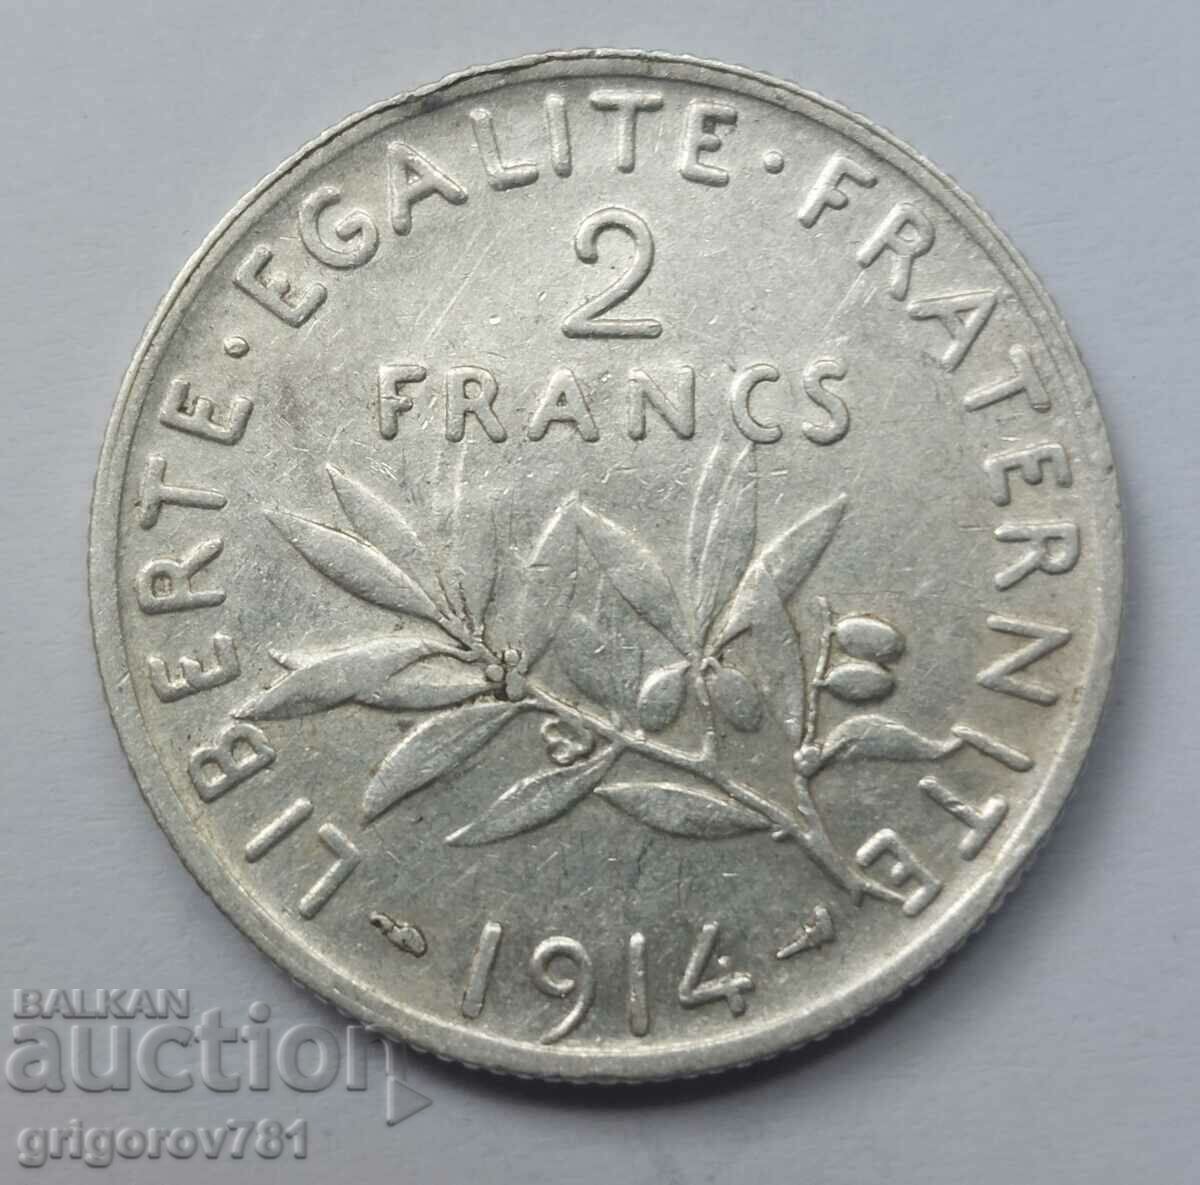 2 Francs Silver France 1914 - Silver Coin #67